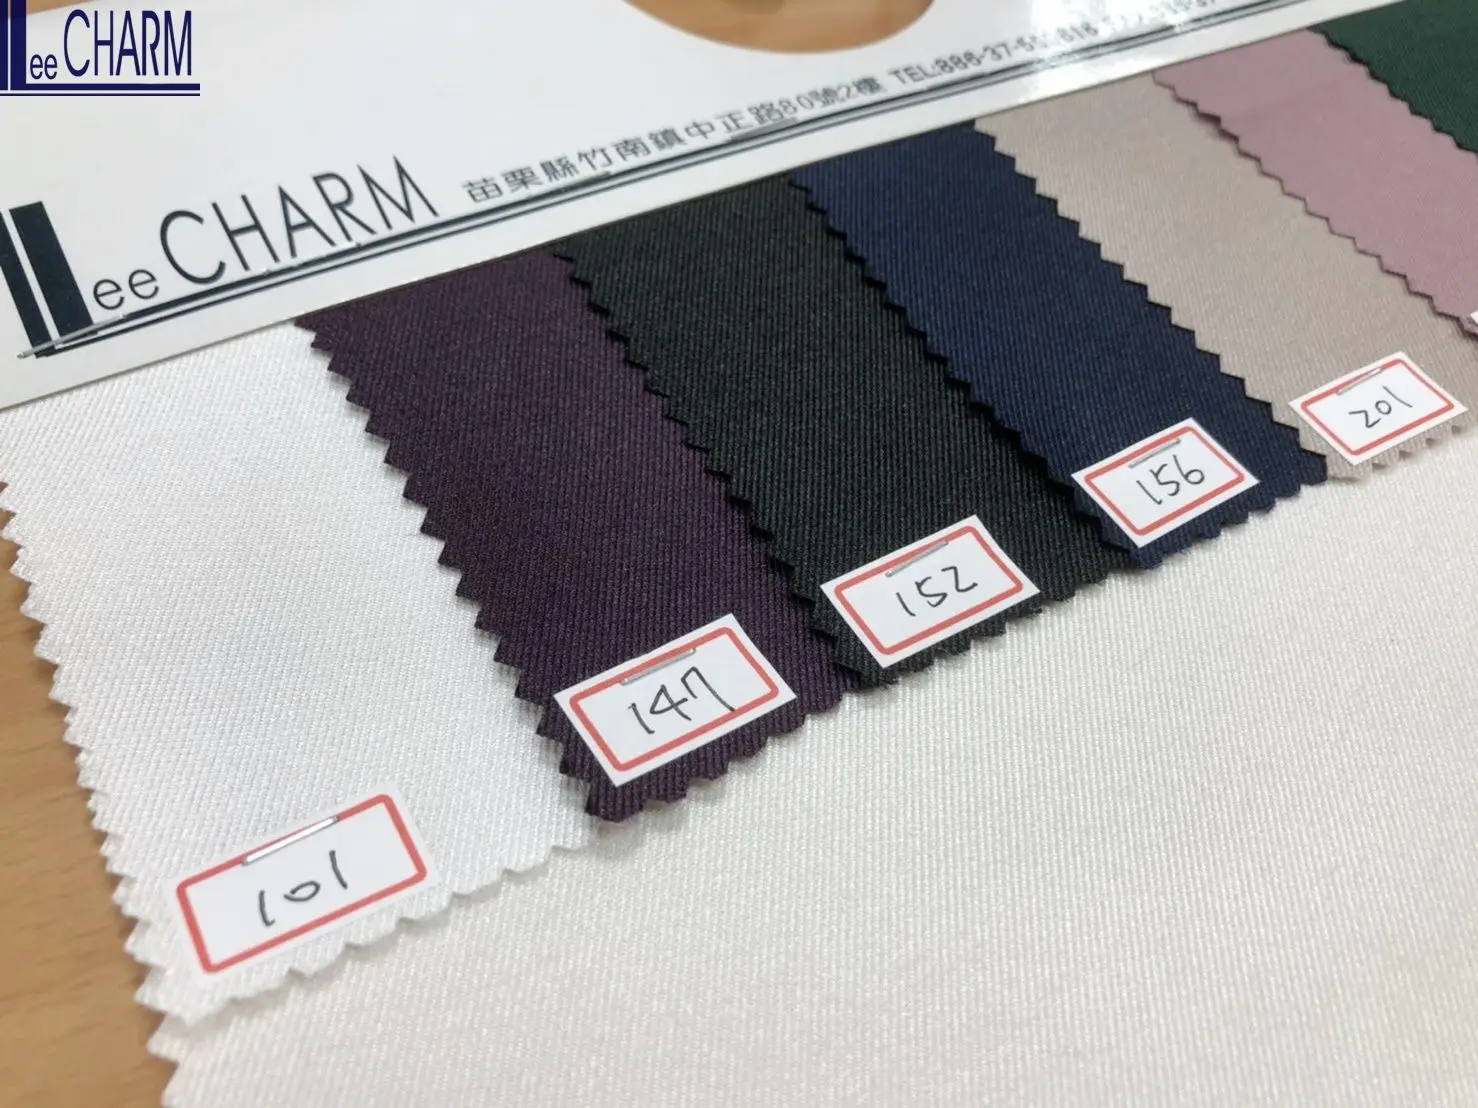 Lc8 Wholesale Taiwan 8 Polyester Sheeny Luxury Magnificence Wedding  Bridal Mikado Fabric   Buy Wholesale Bridal Fabric,Satin Bridal  Fabric,Fabric Bridal Product on Alibaba.com